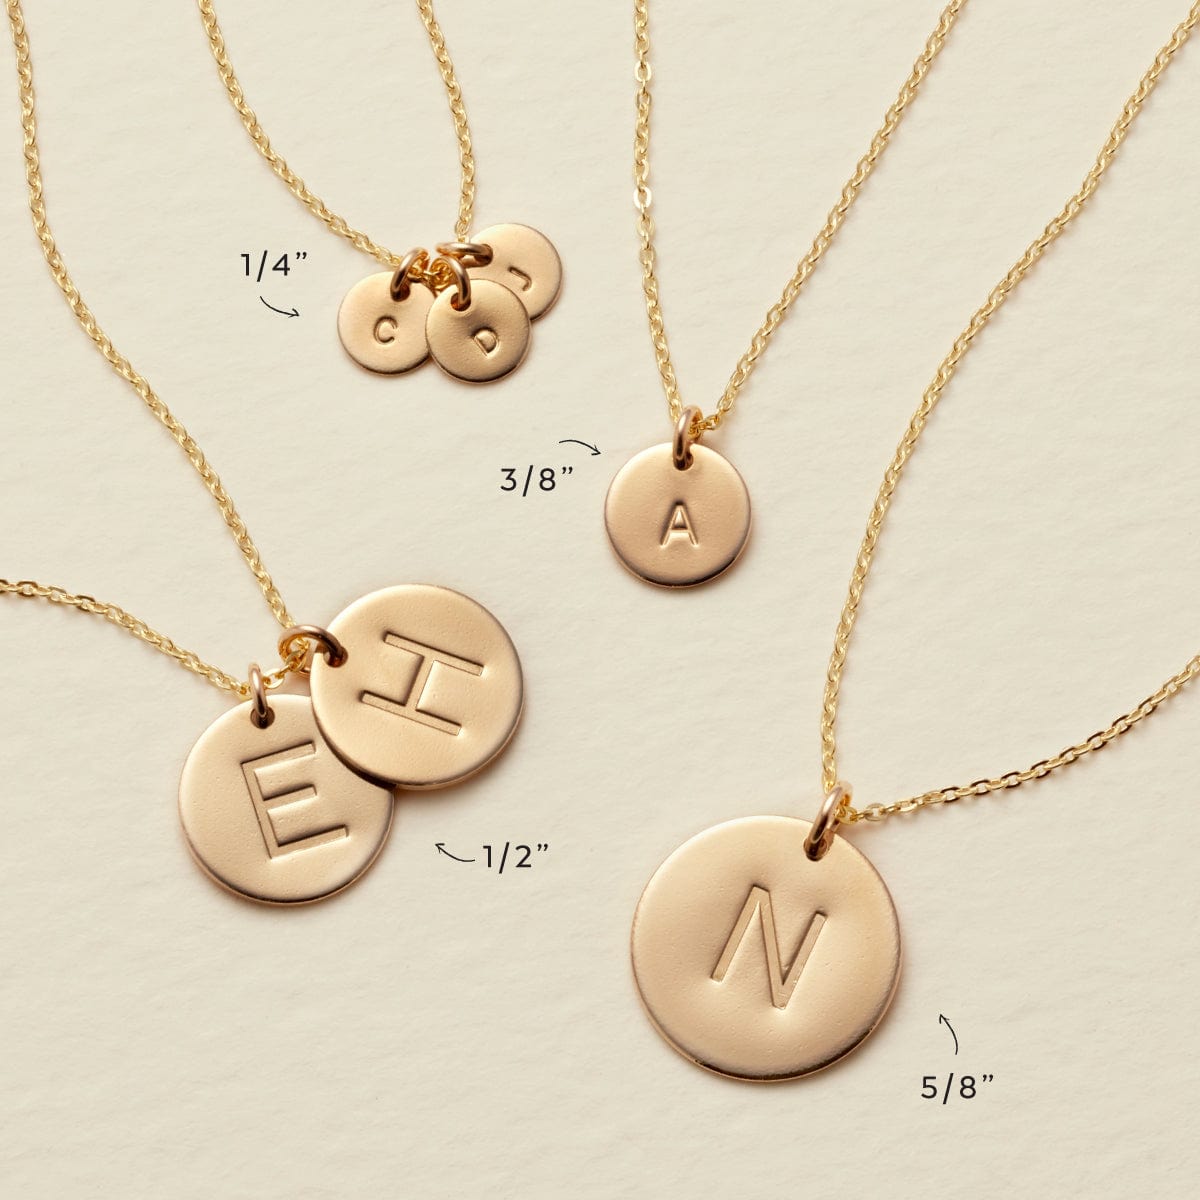 Monogram Disc Necklace in Gold or Silver by Megu's Attic